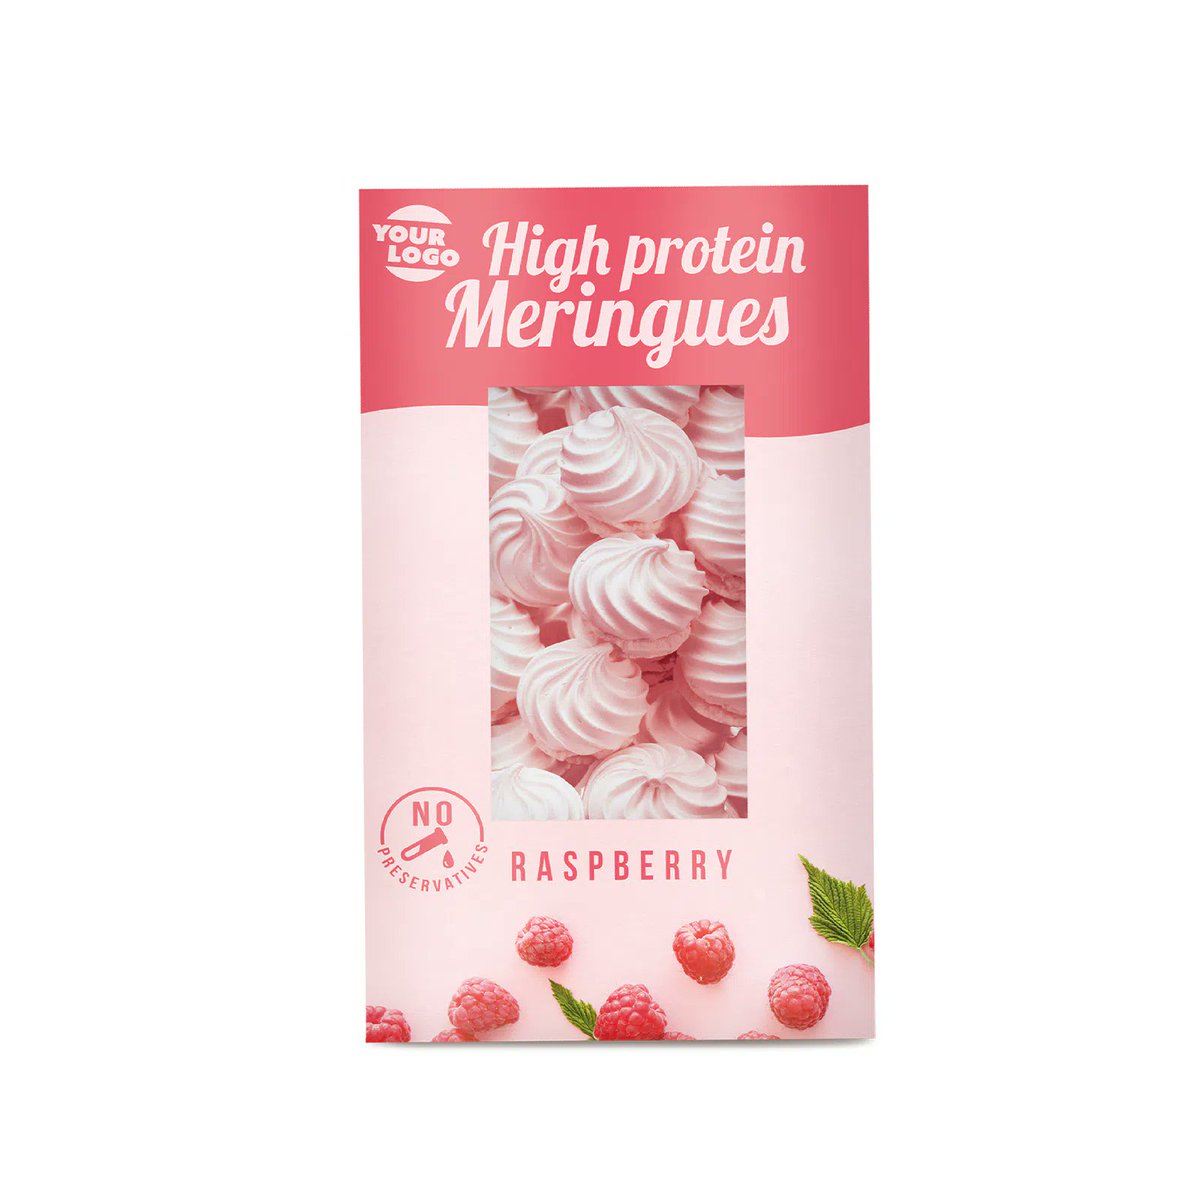 High-protein Meringues Only 2 calories per unit ,High protein ,Nutrient rich,Fat free ,No added sugar #healthyeating #healthychoices #gymlife #activelife #fitfam #livelifehealthy #healthylifestyle #weightlossdiet #proteinbreakfast #proteinfood #noaddedsugar